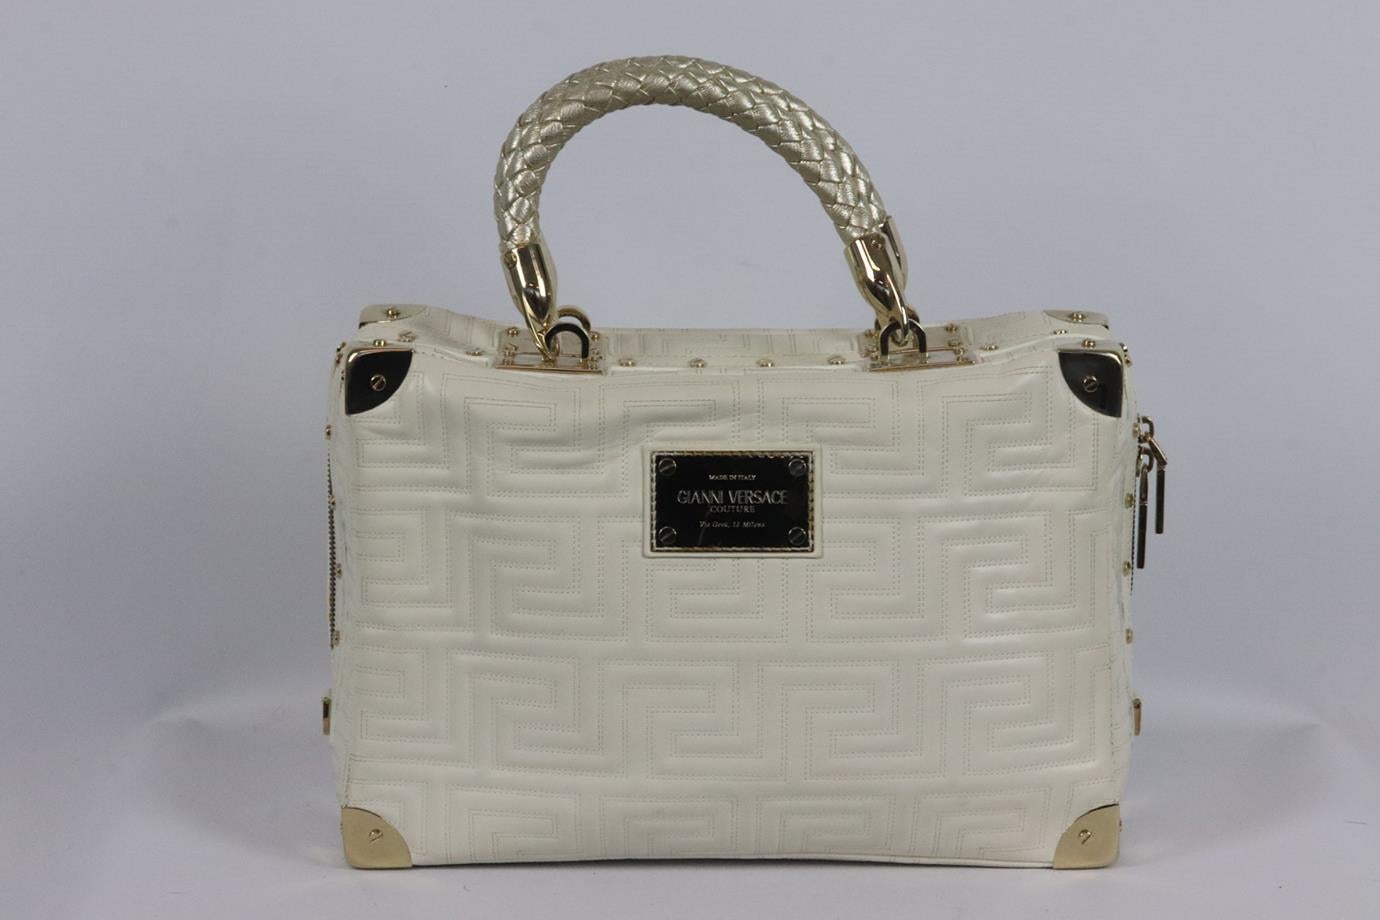 Gianni Versace Couture vintage embroidered leather tote bag. White and gold. Zip fastening at top. Does not come with dusbtag or box. Height: 9 in. Width: 12.75 in. Depth: 4 in. Handle Drop: 5 in. Fair condition - Light marks to interior material.